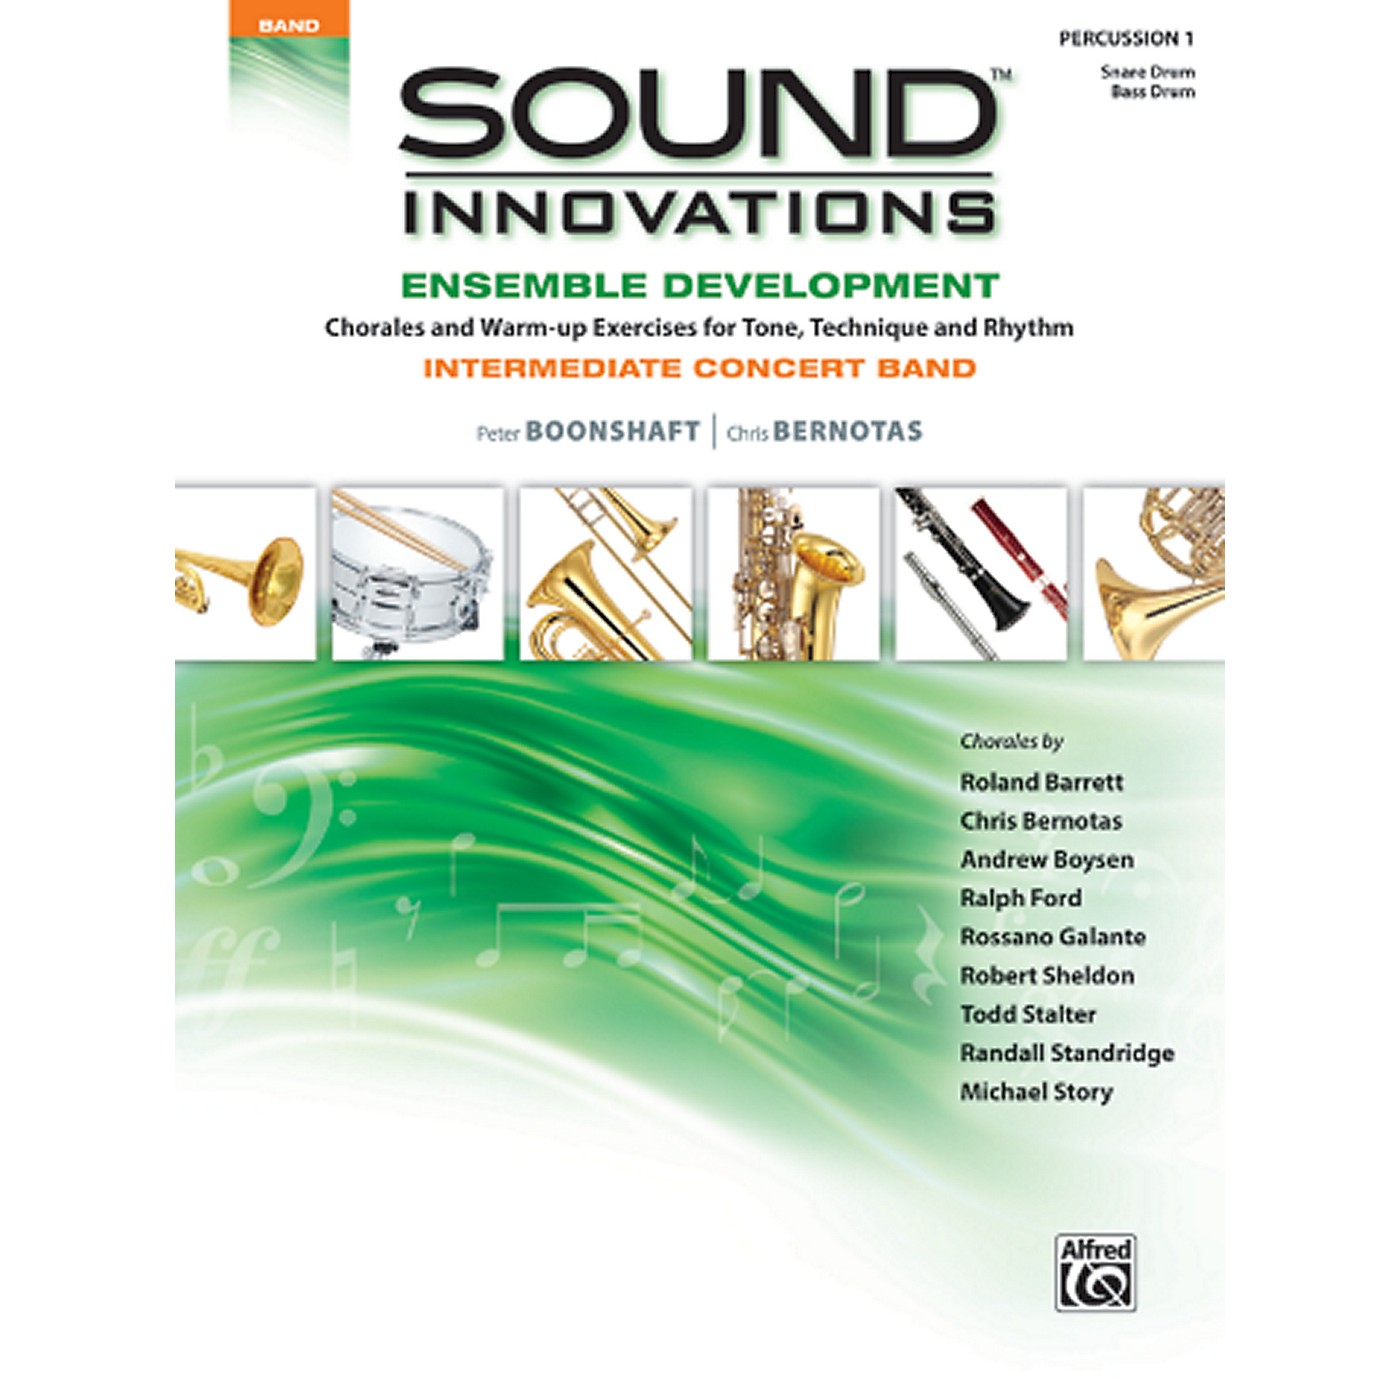 Alfred Sound Innovations Concert Band Ensemble Development Percussion 1 Book thumbnail